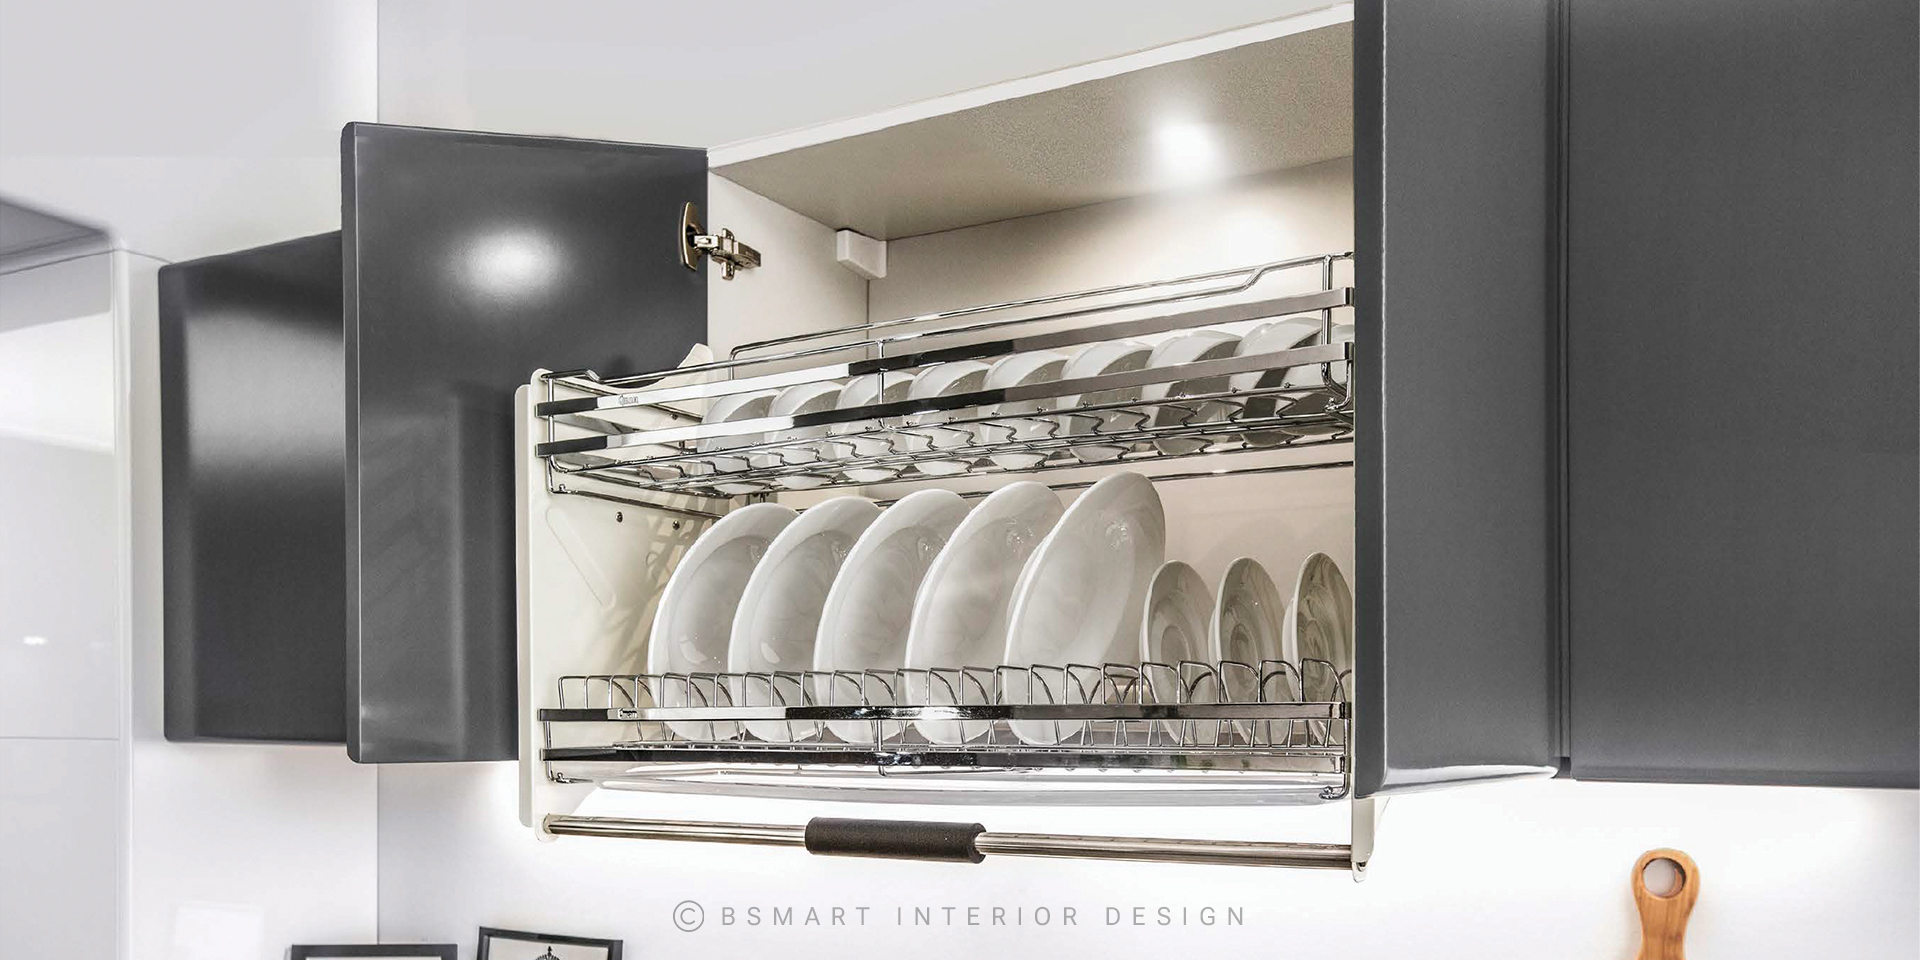 The great thing inside BSMART’s high-end kitchen cabinets